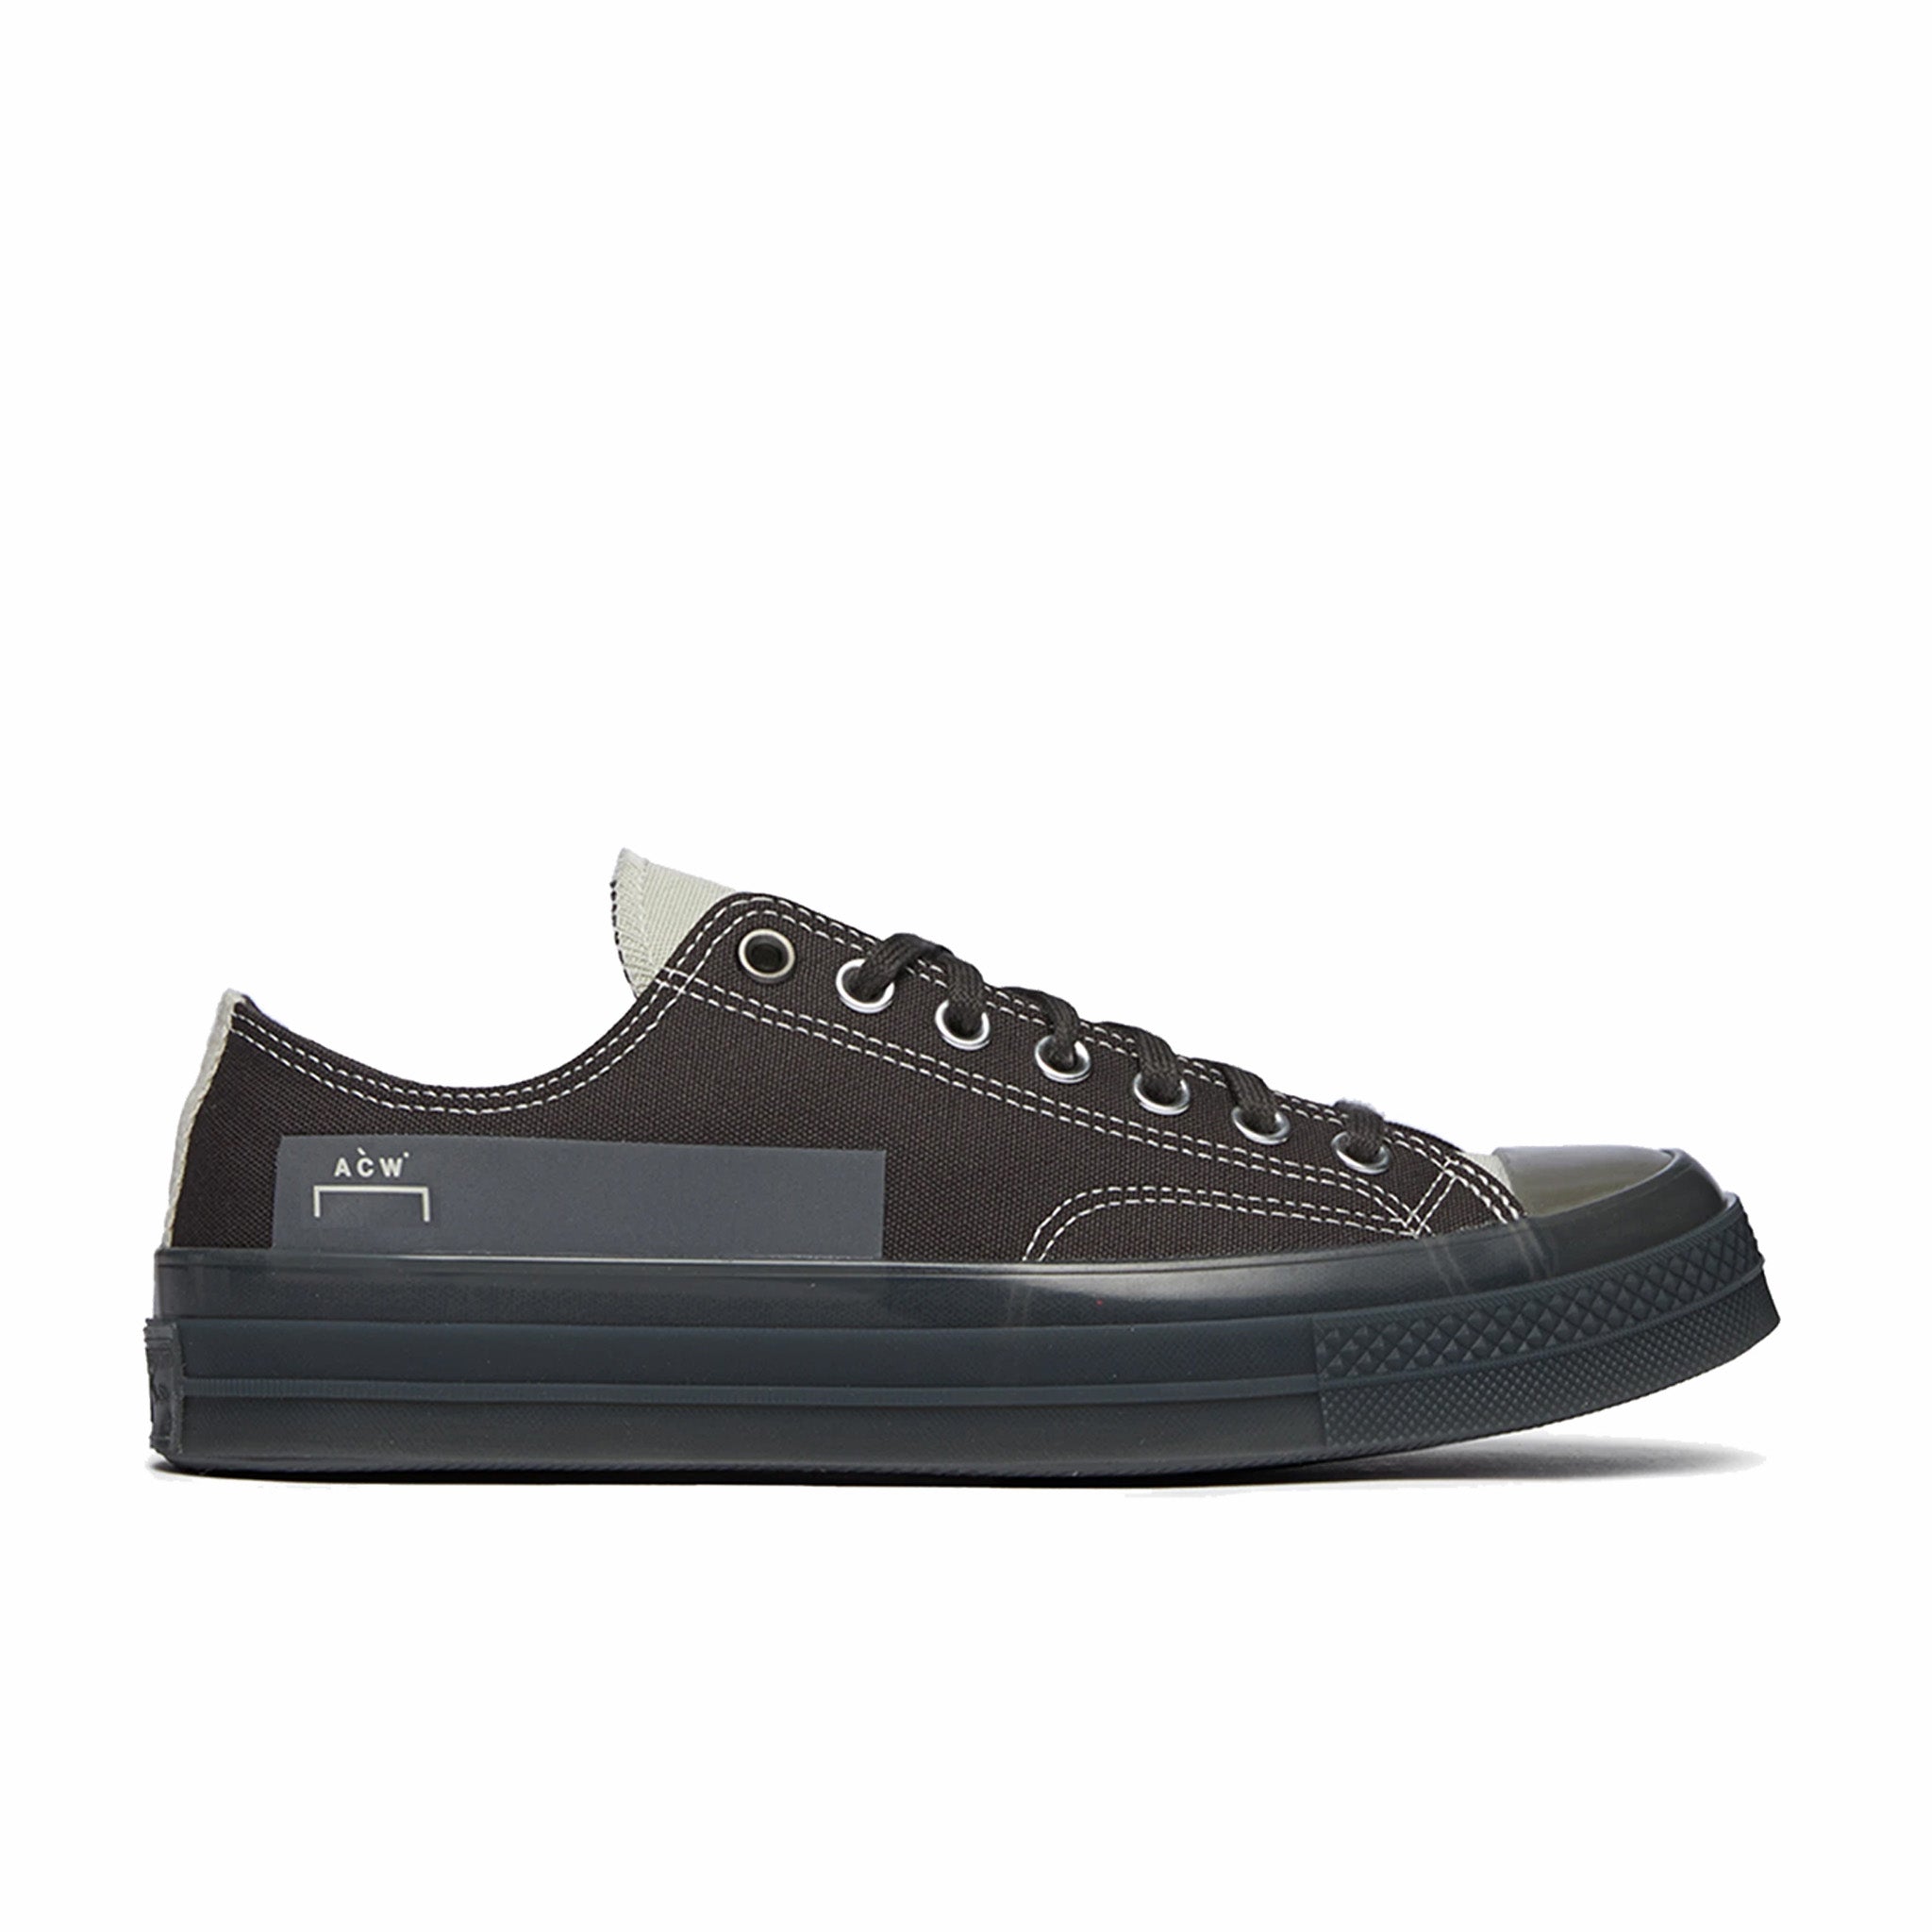 A-COLD-WALL* x Converse Chuck 70 Low Sneakers (Pavement/Silver Birch/Pavement) - August Shop